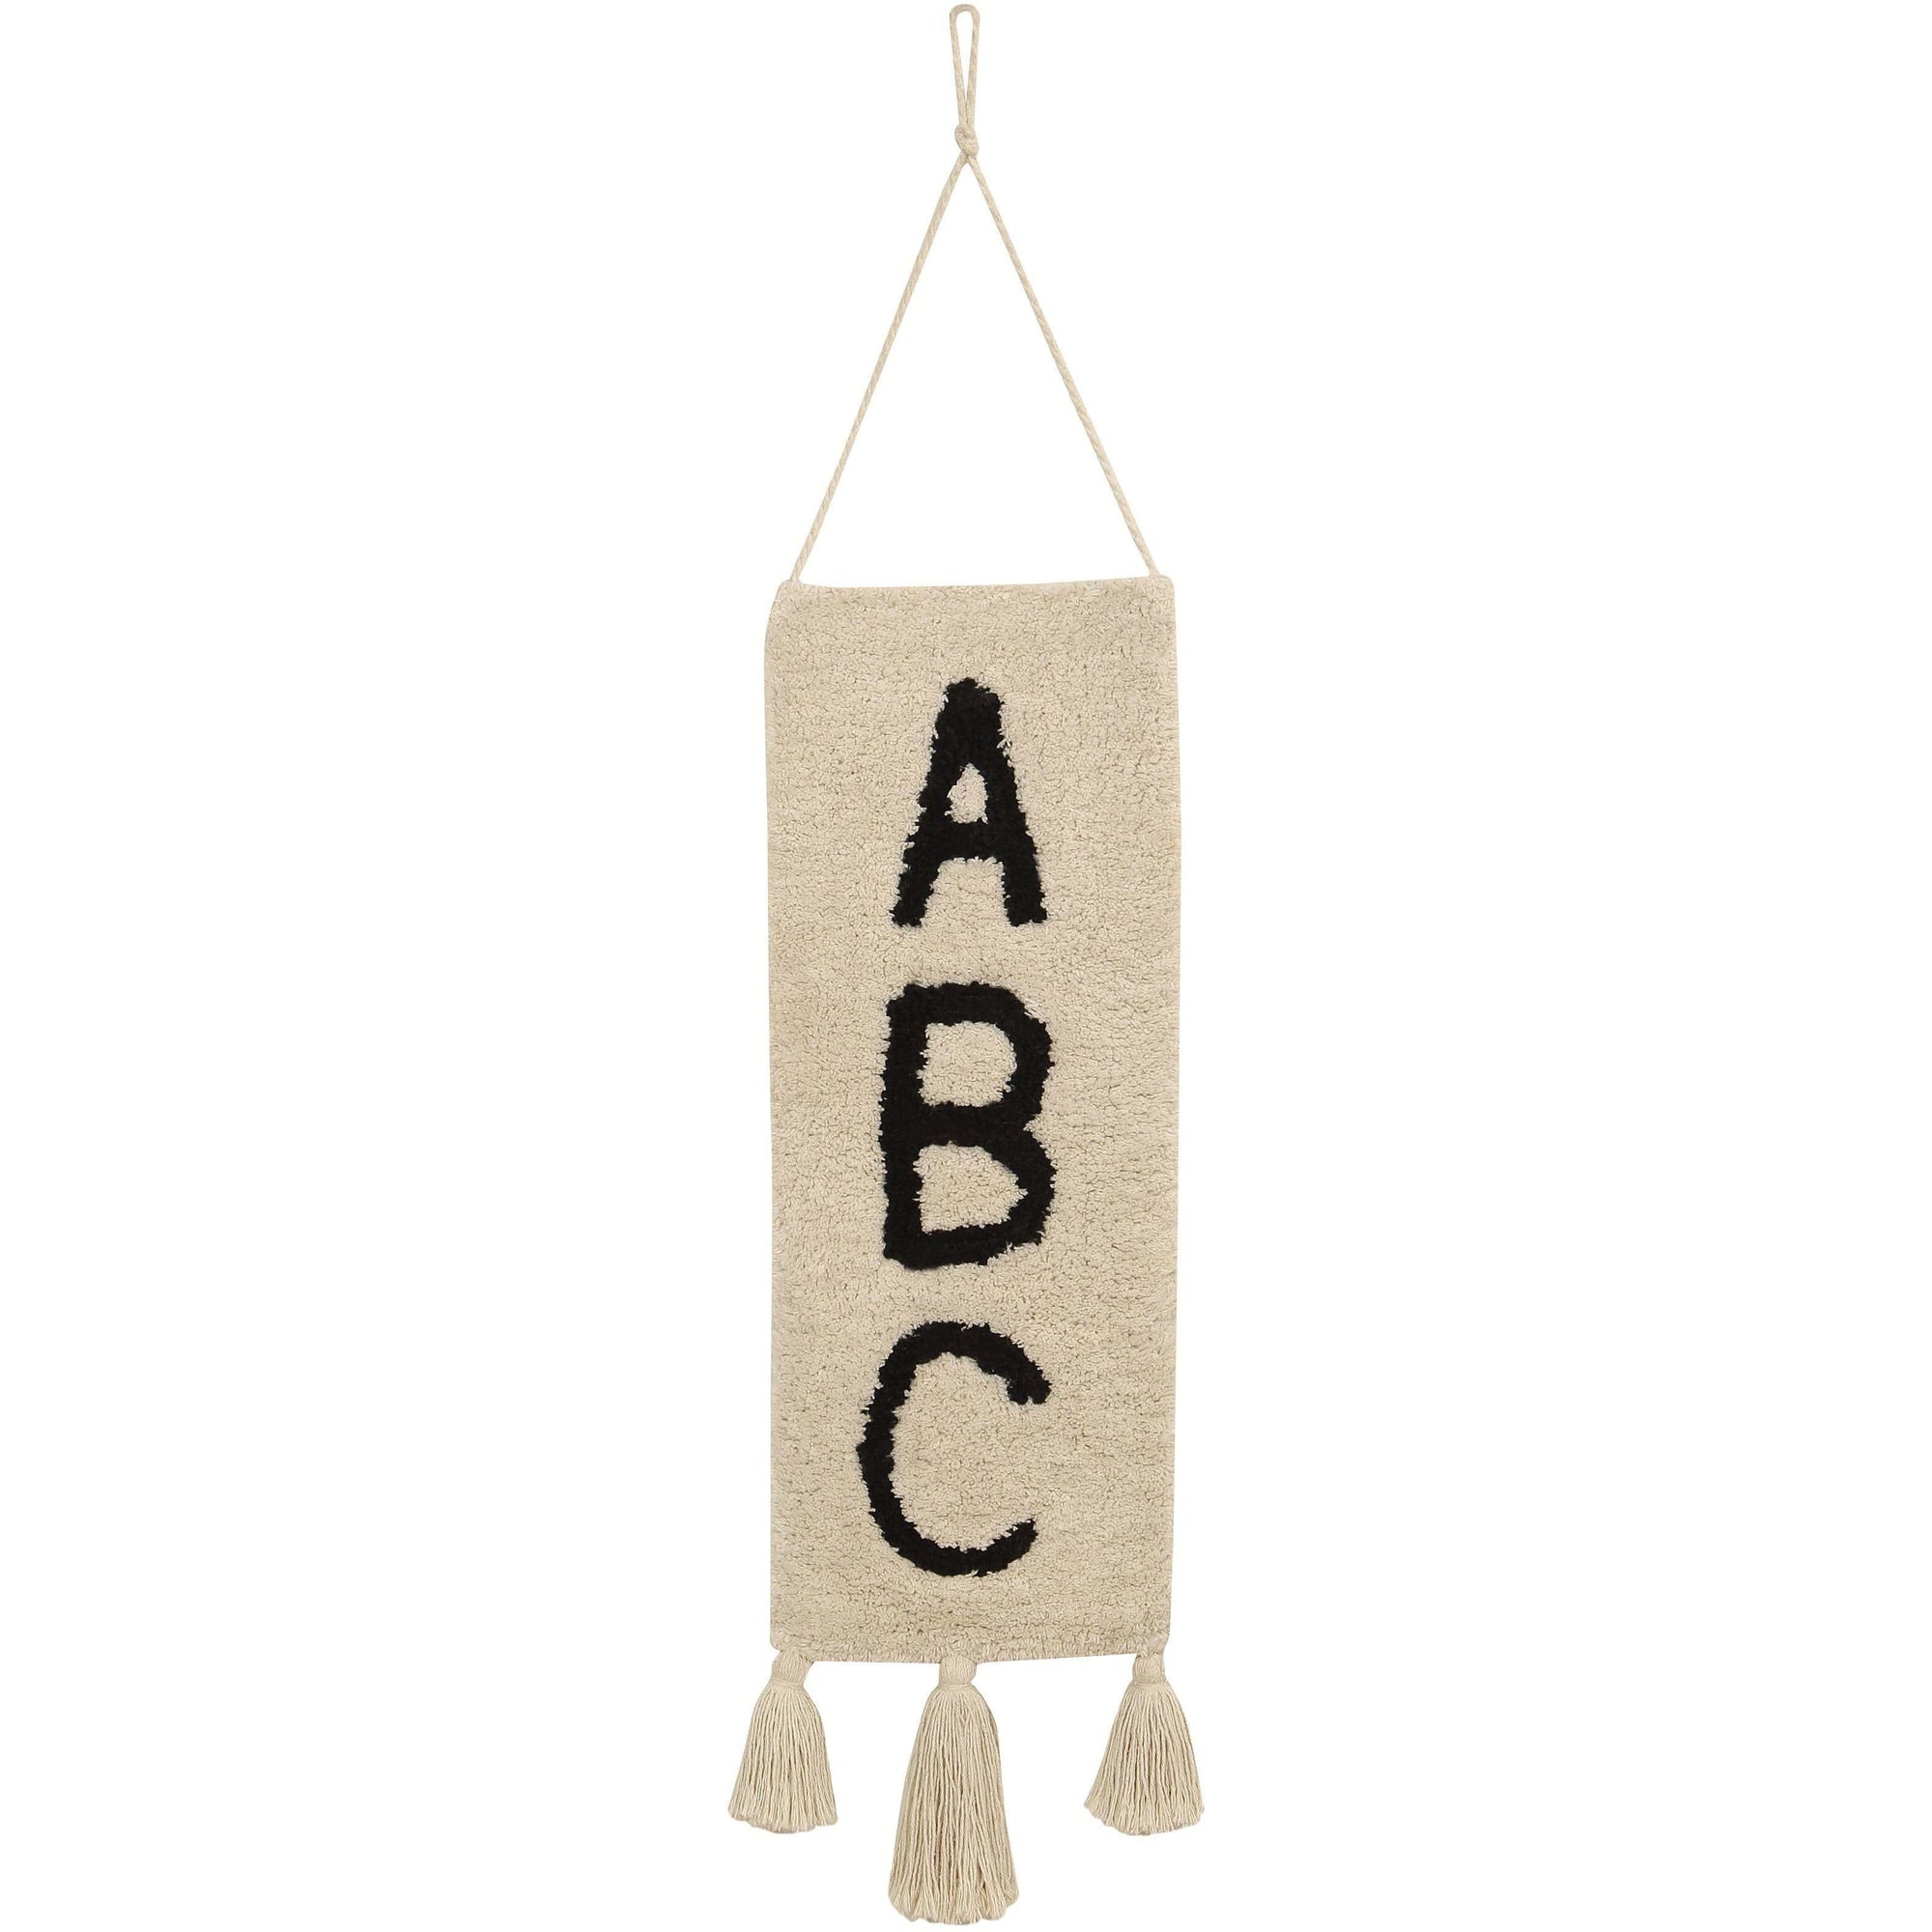 Rugs by Roo | Lorena Canals ABC Wall Hanging-HANG-ABC